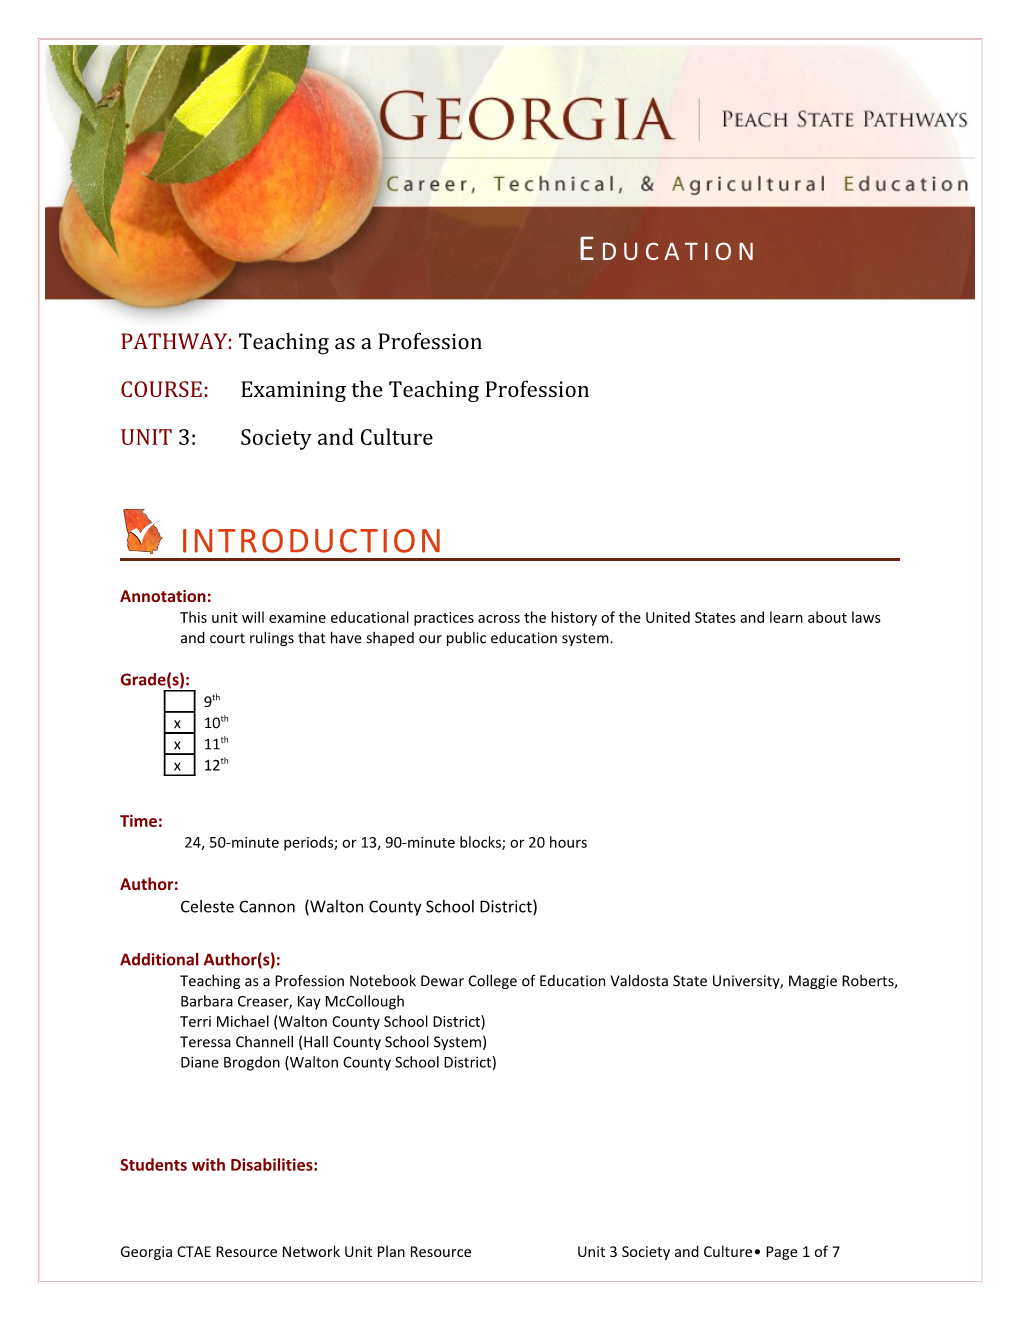 COURSE: Examining the Teaching Profession